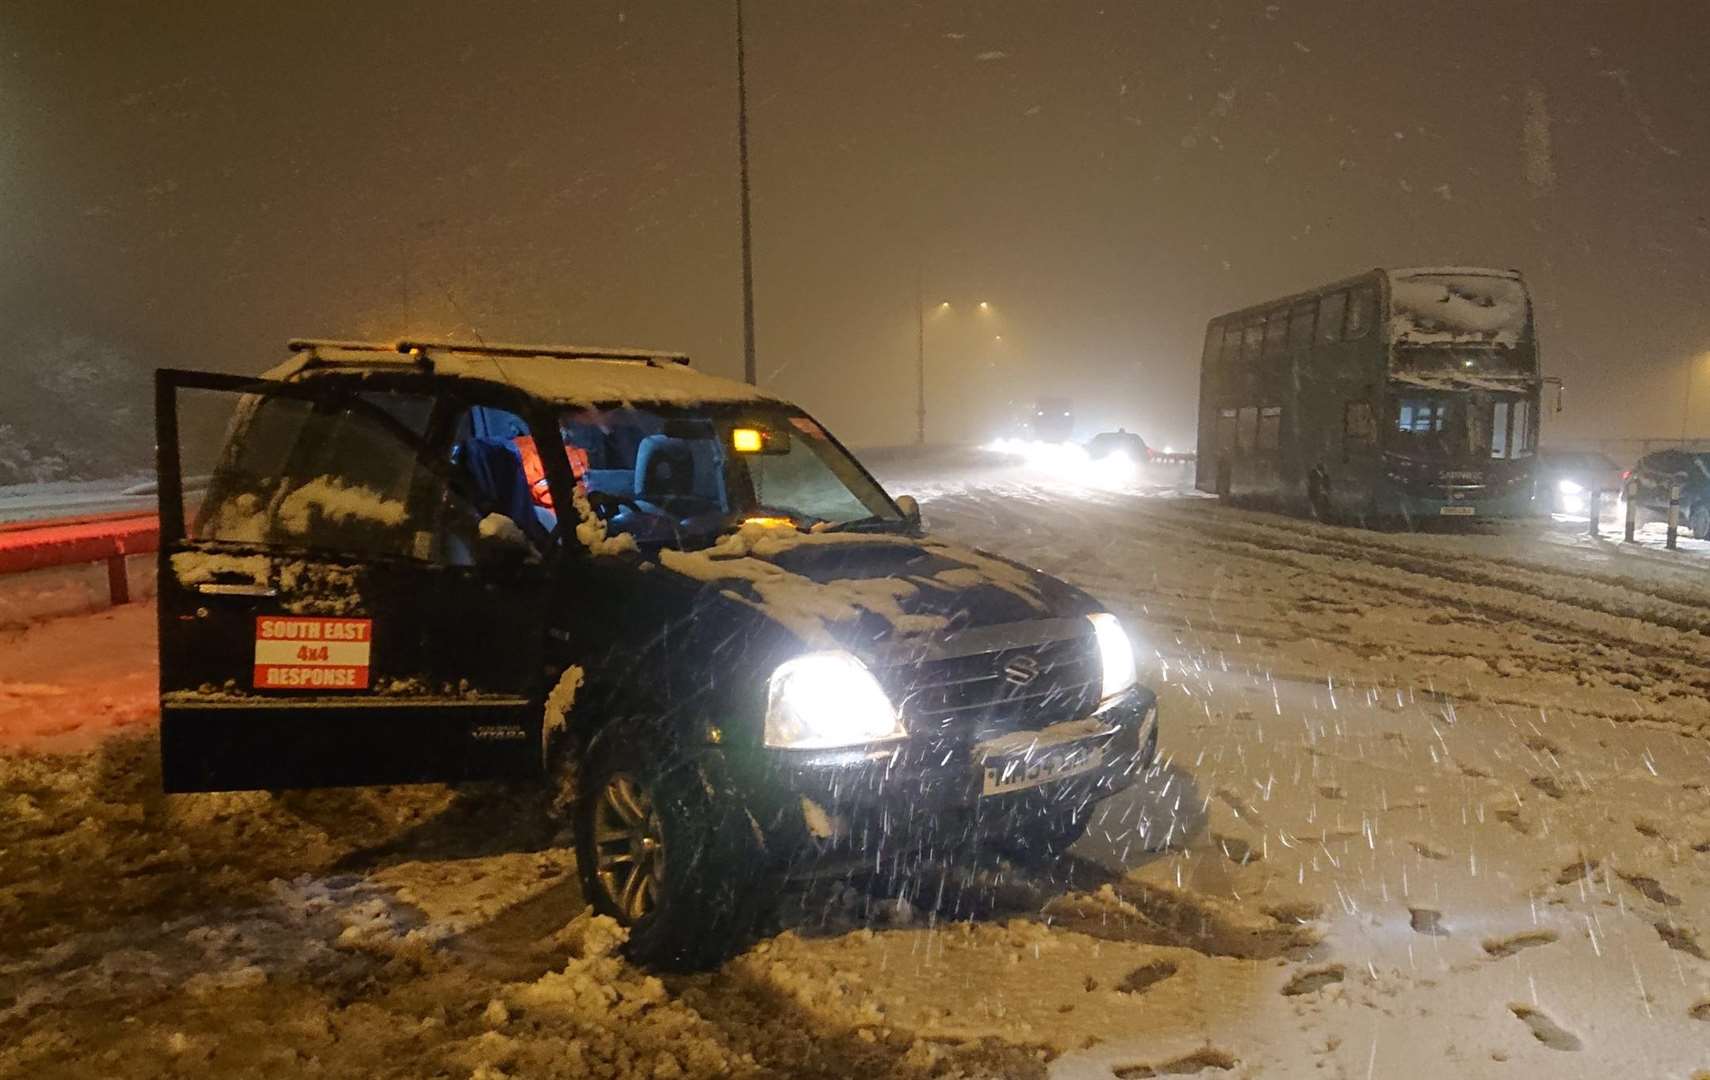 South East 4x4 Response worked through the night to help drivers across the county (6927709)